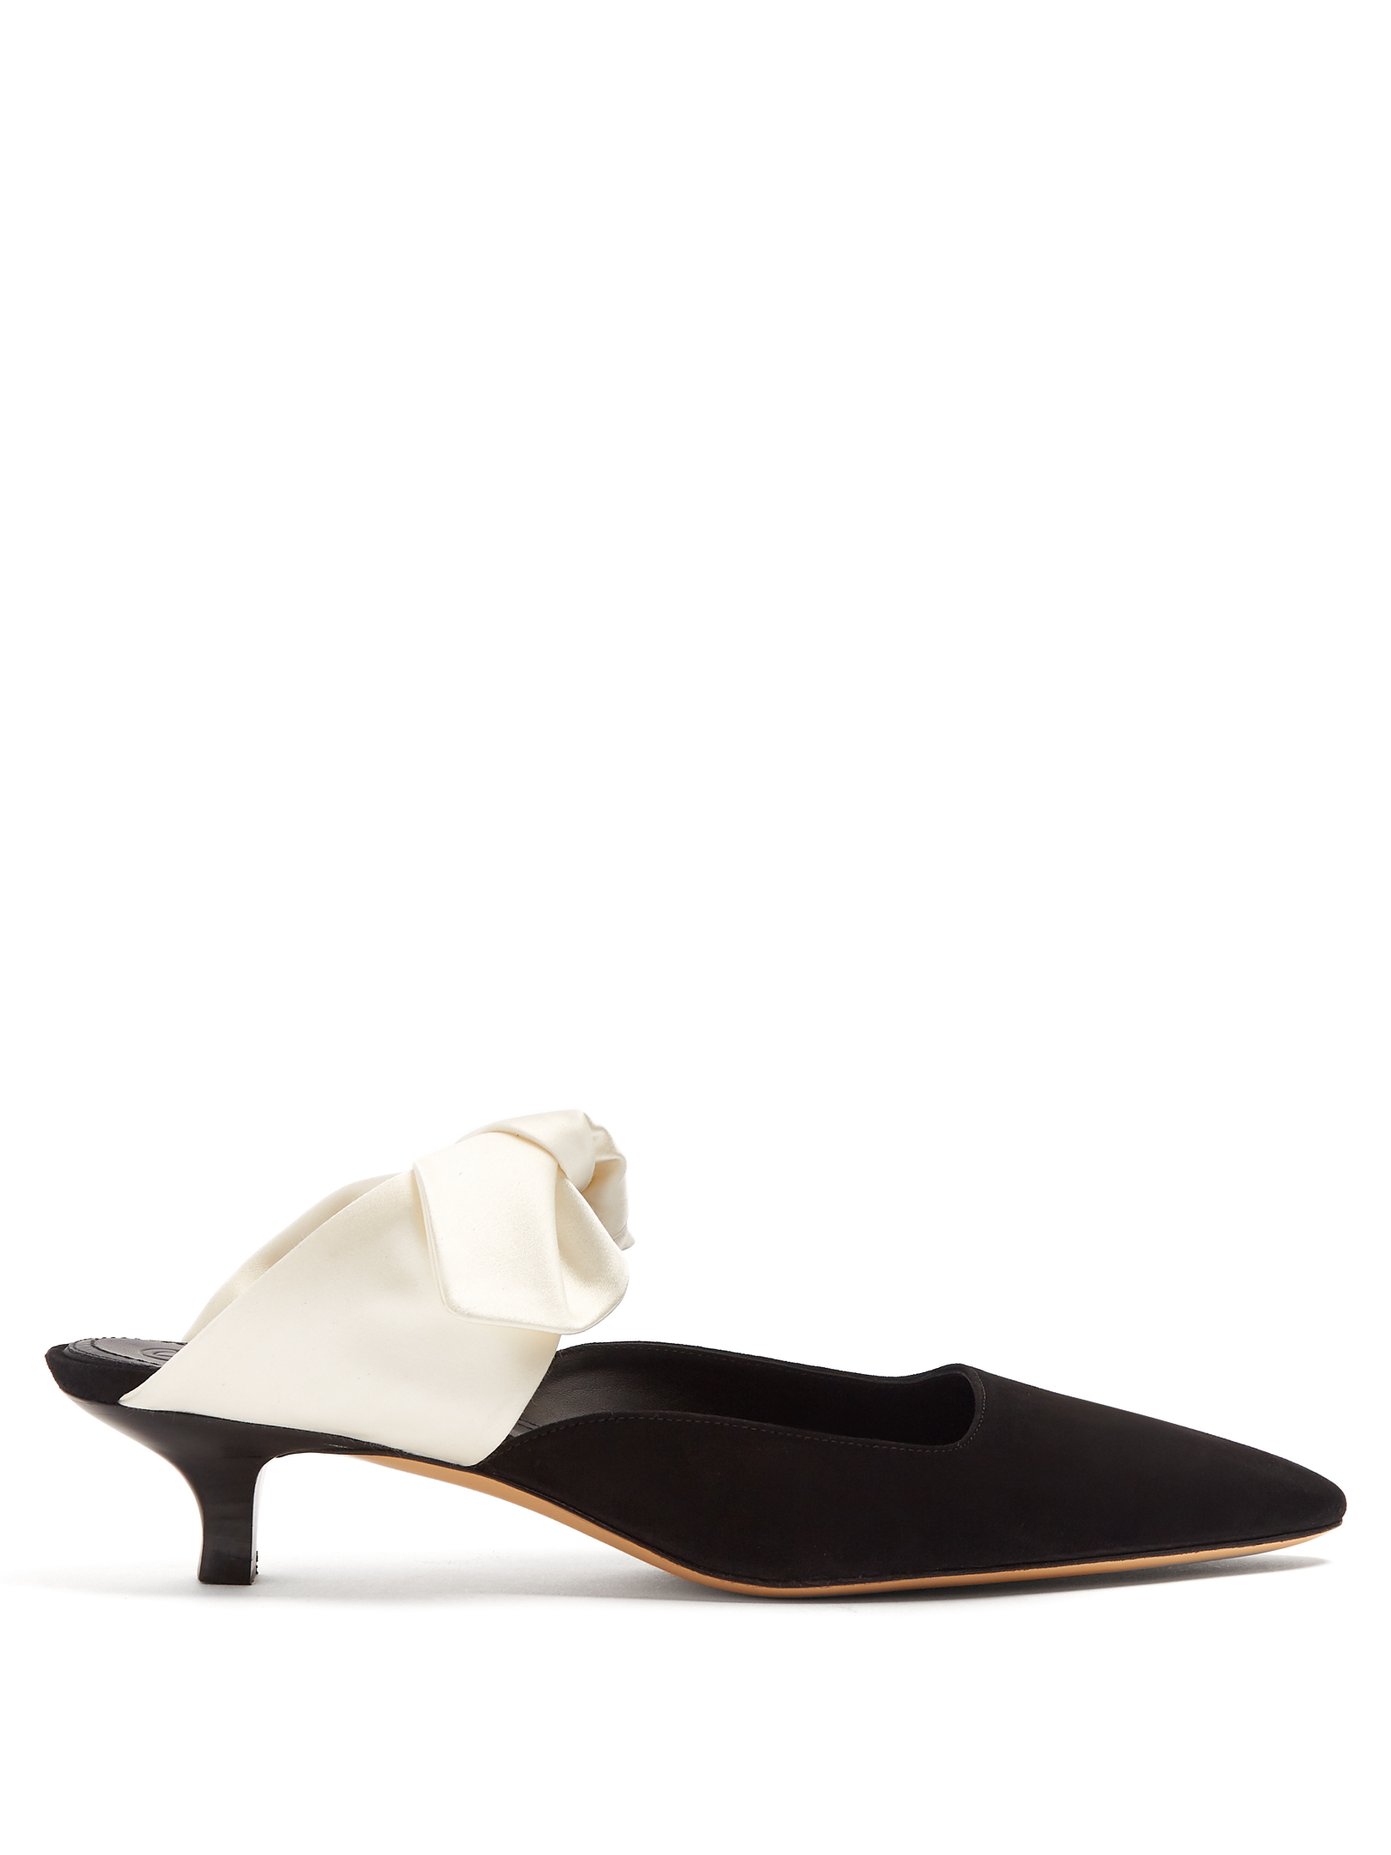 Coco satin-bow suede mules | The Row 